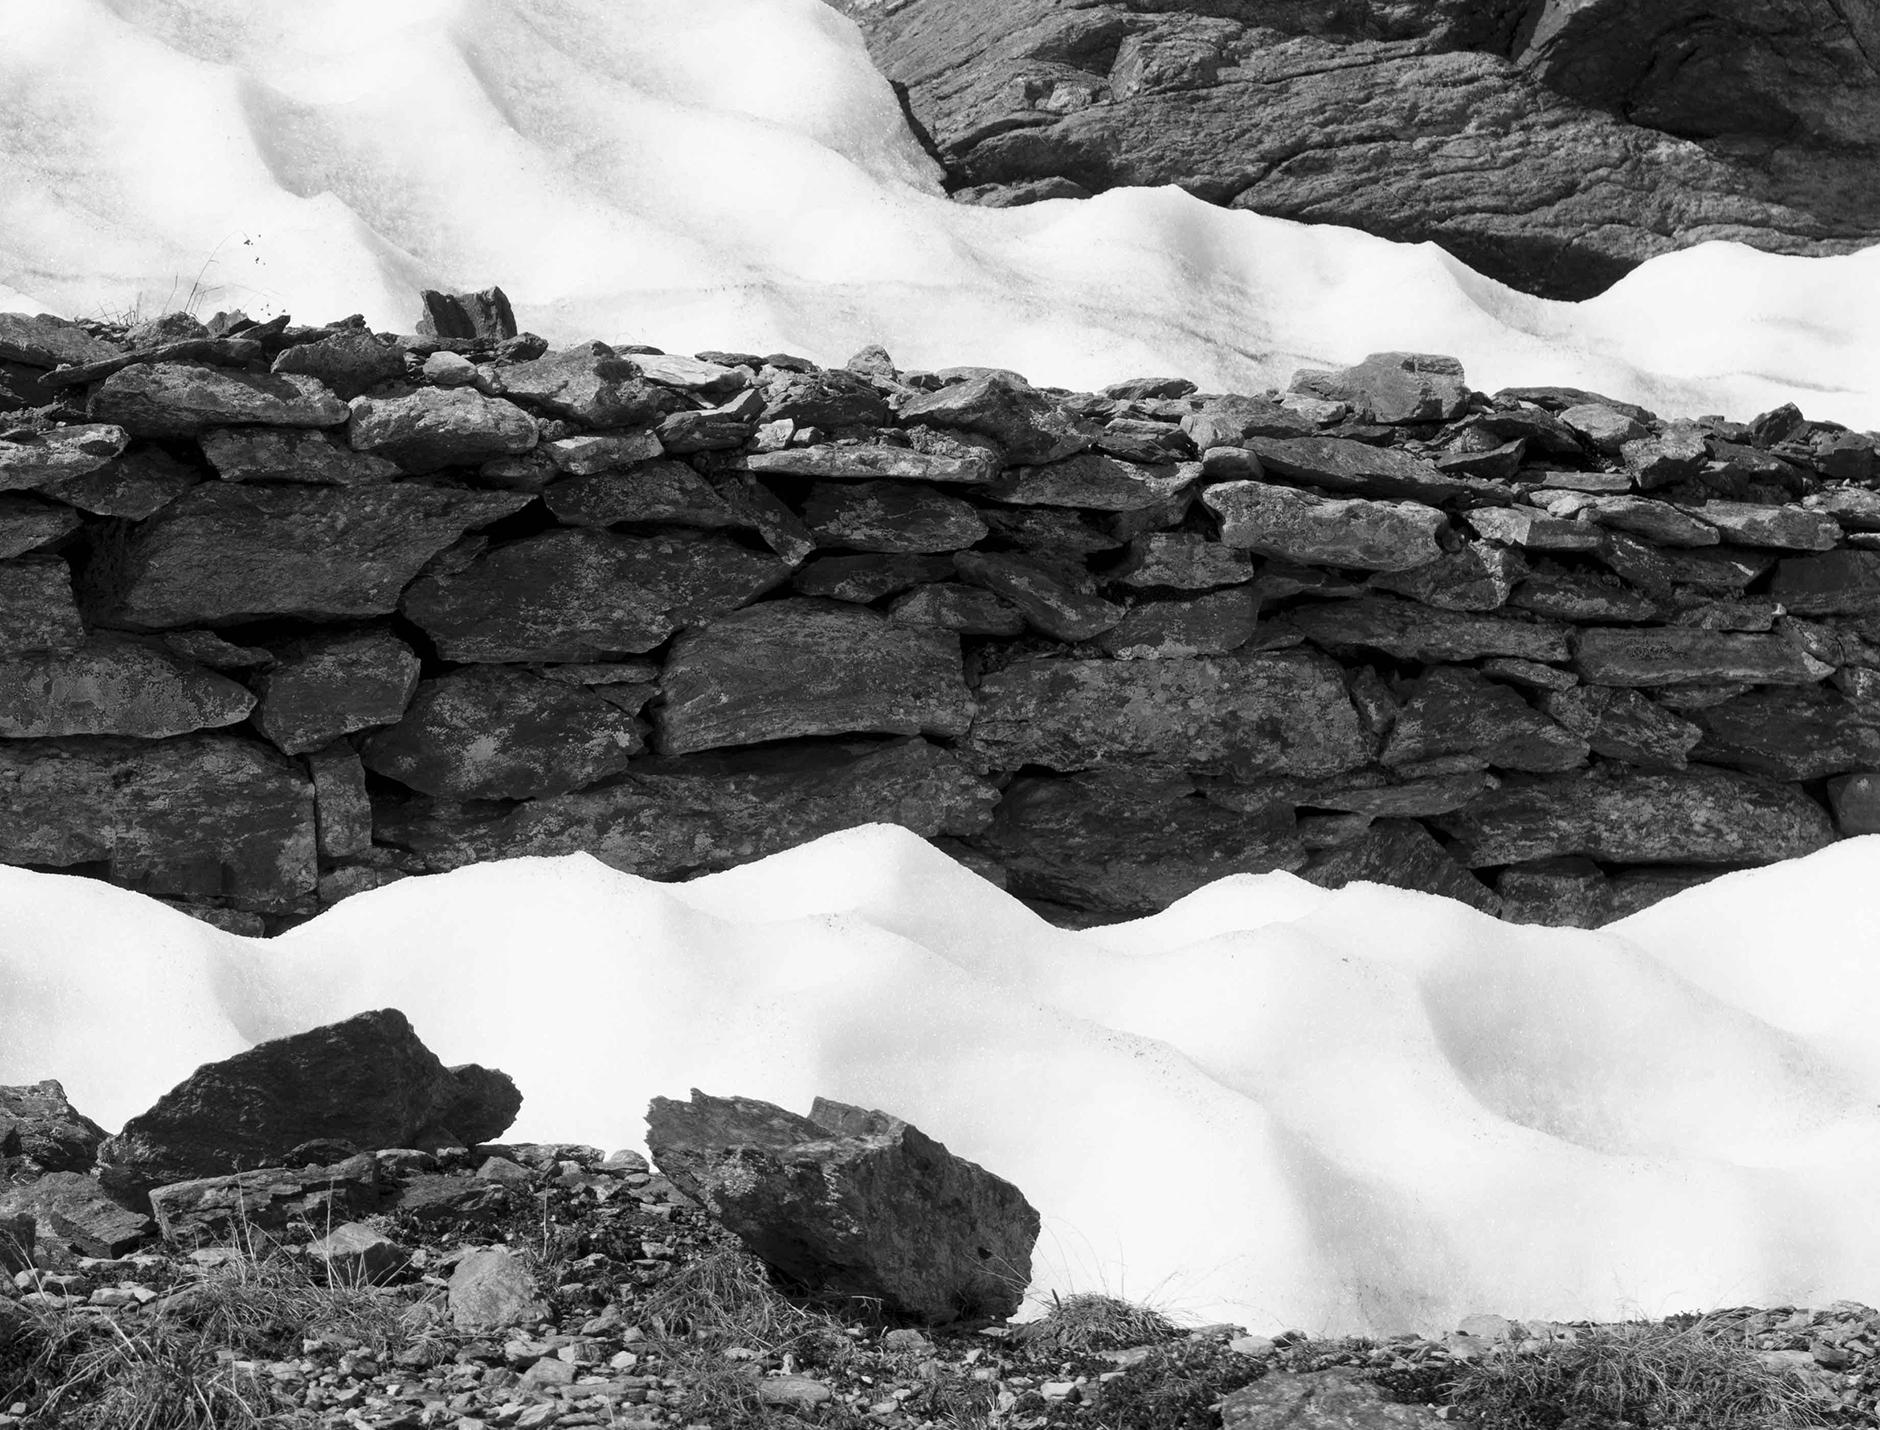 A Fatal Pass, War remains emerging from the snow. Black and White landscape - Contemporary Photograph by Luca Artioli